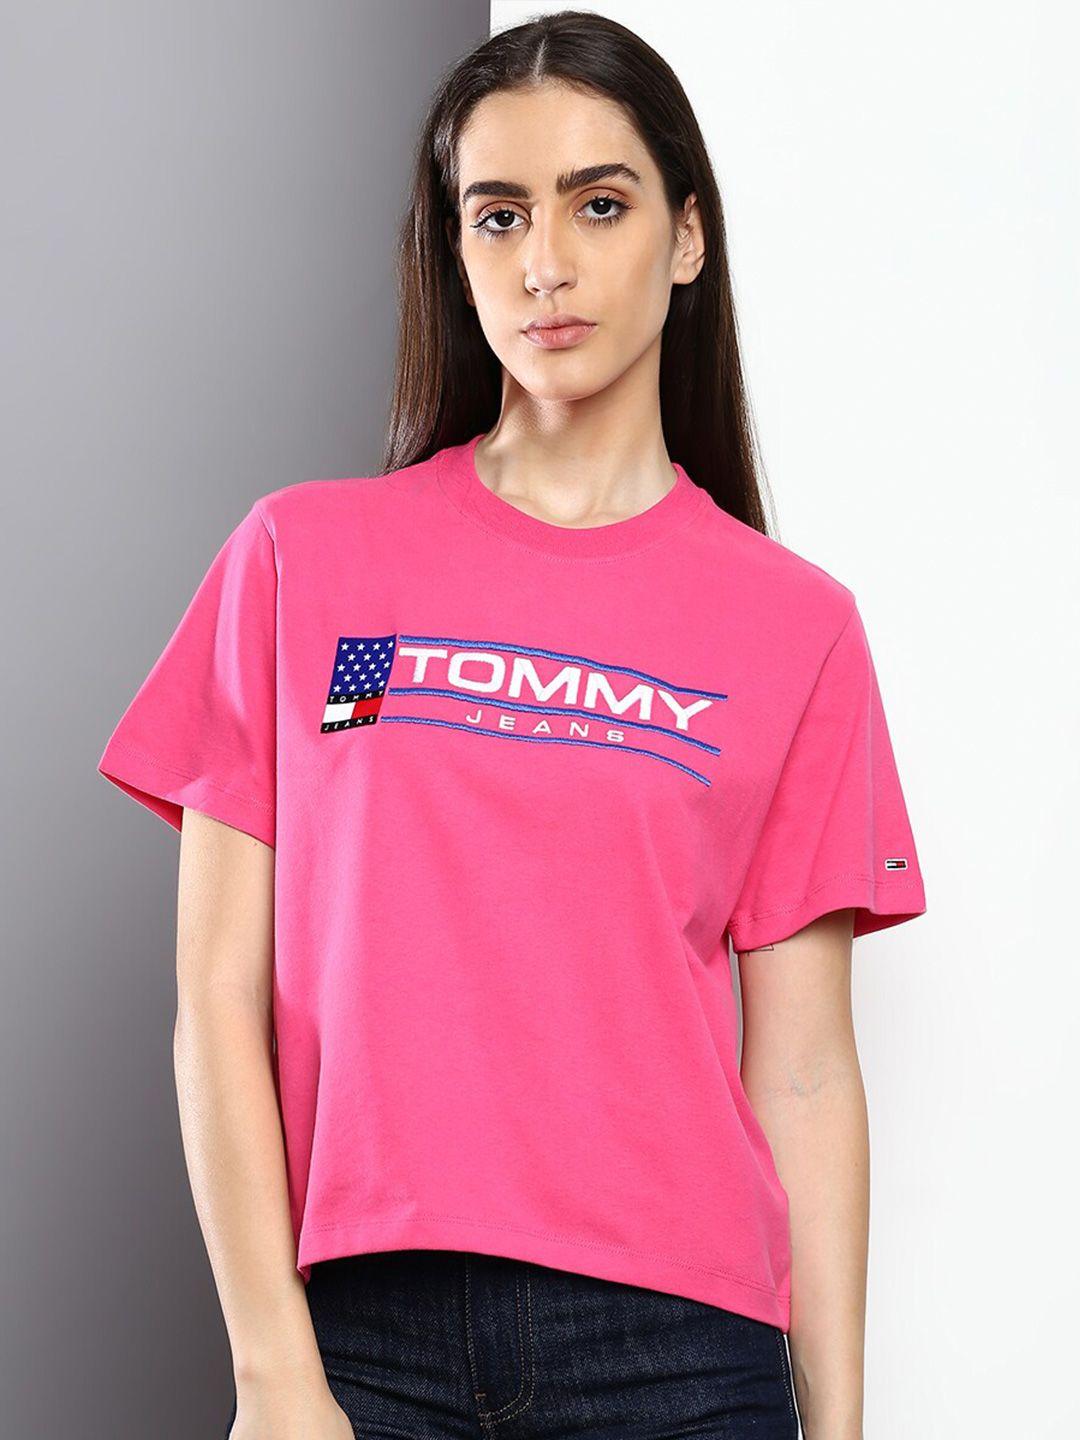 tommy-hilfiger-women-typography-printed-cotton-t-shirt